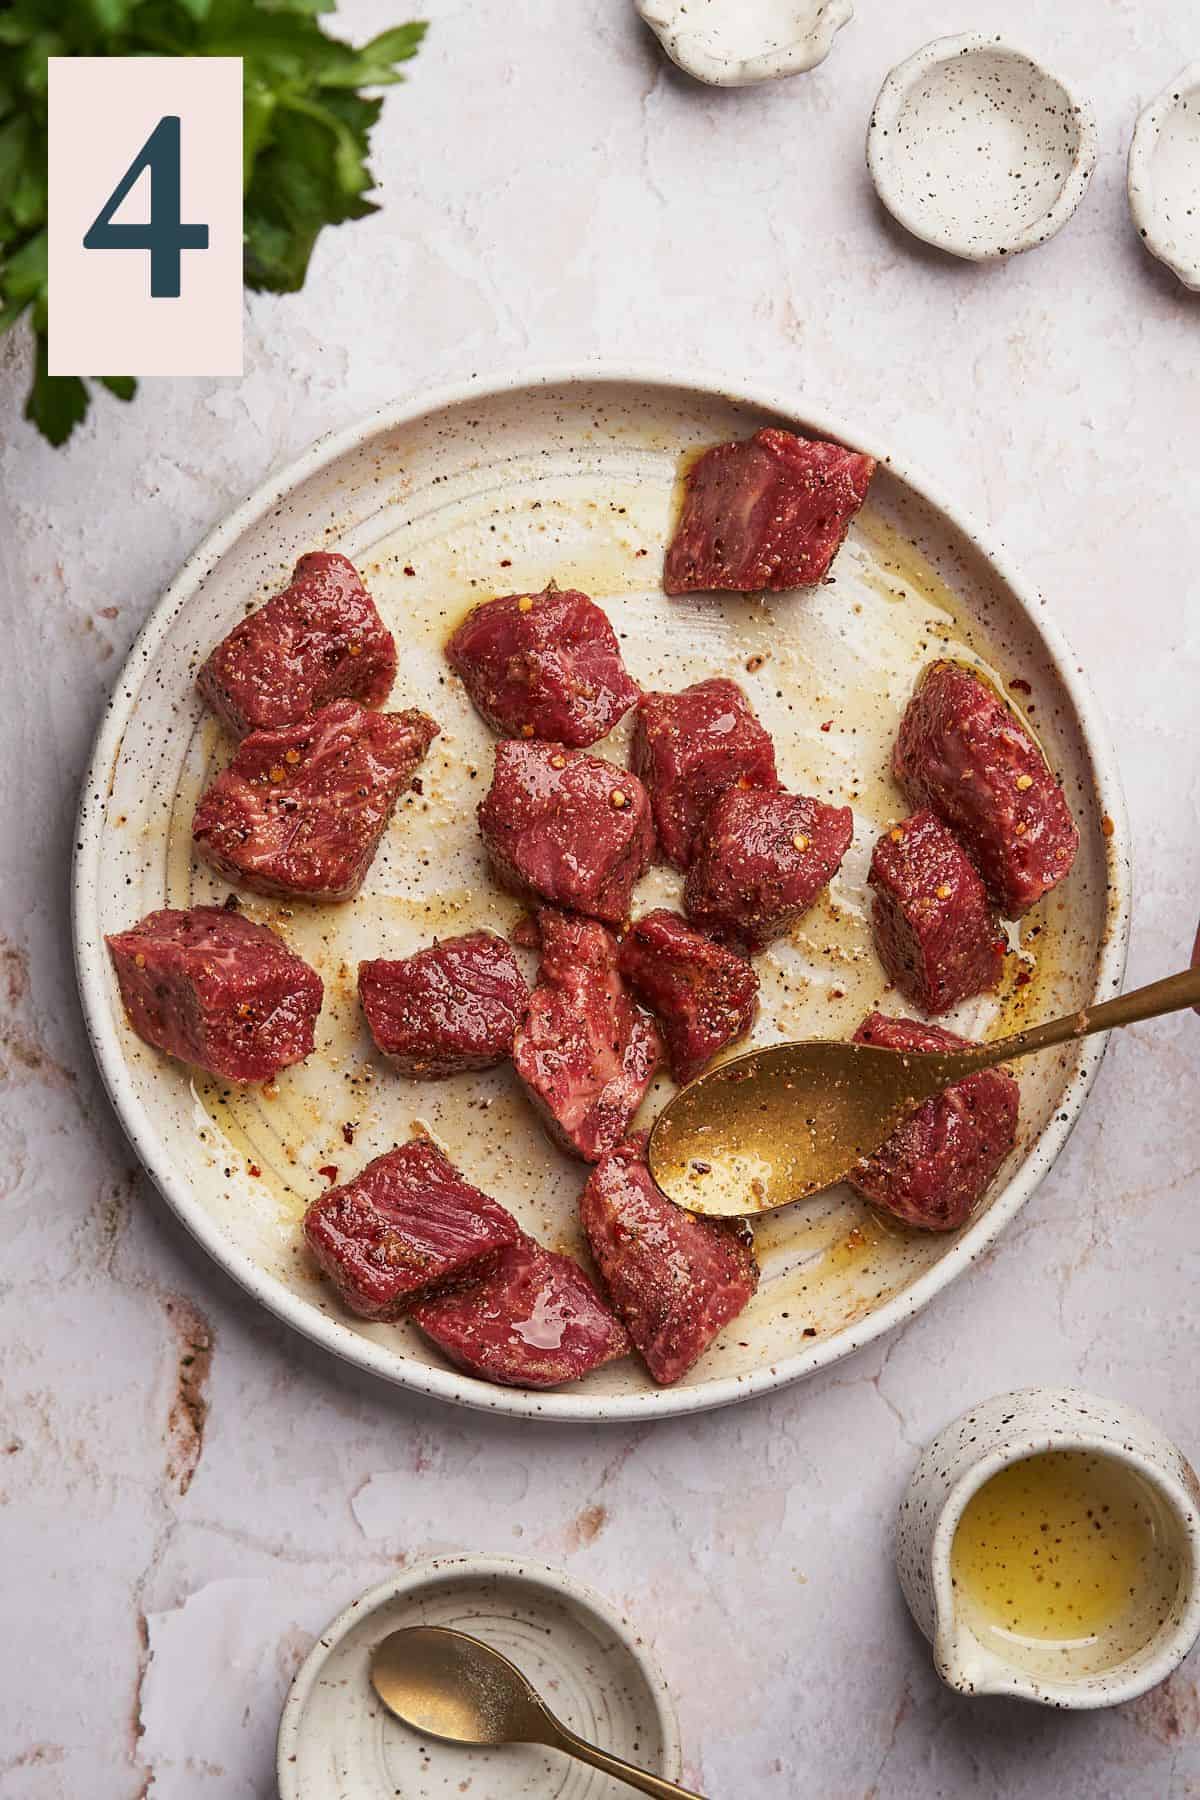 Mixing steak together well with spice blend and olive oil.